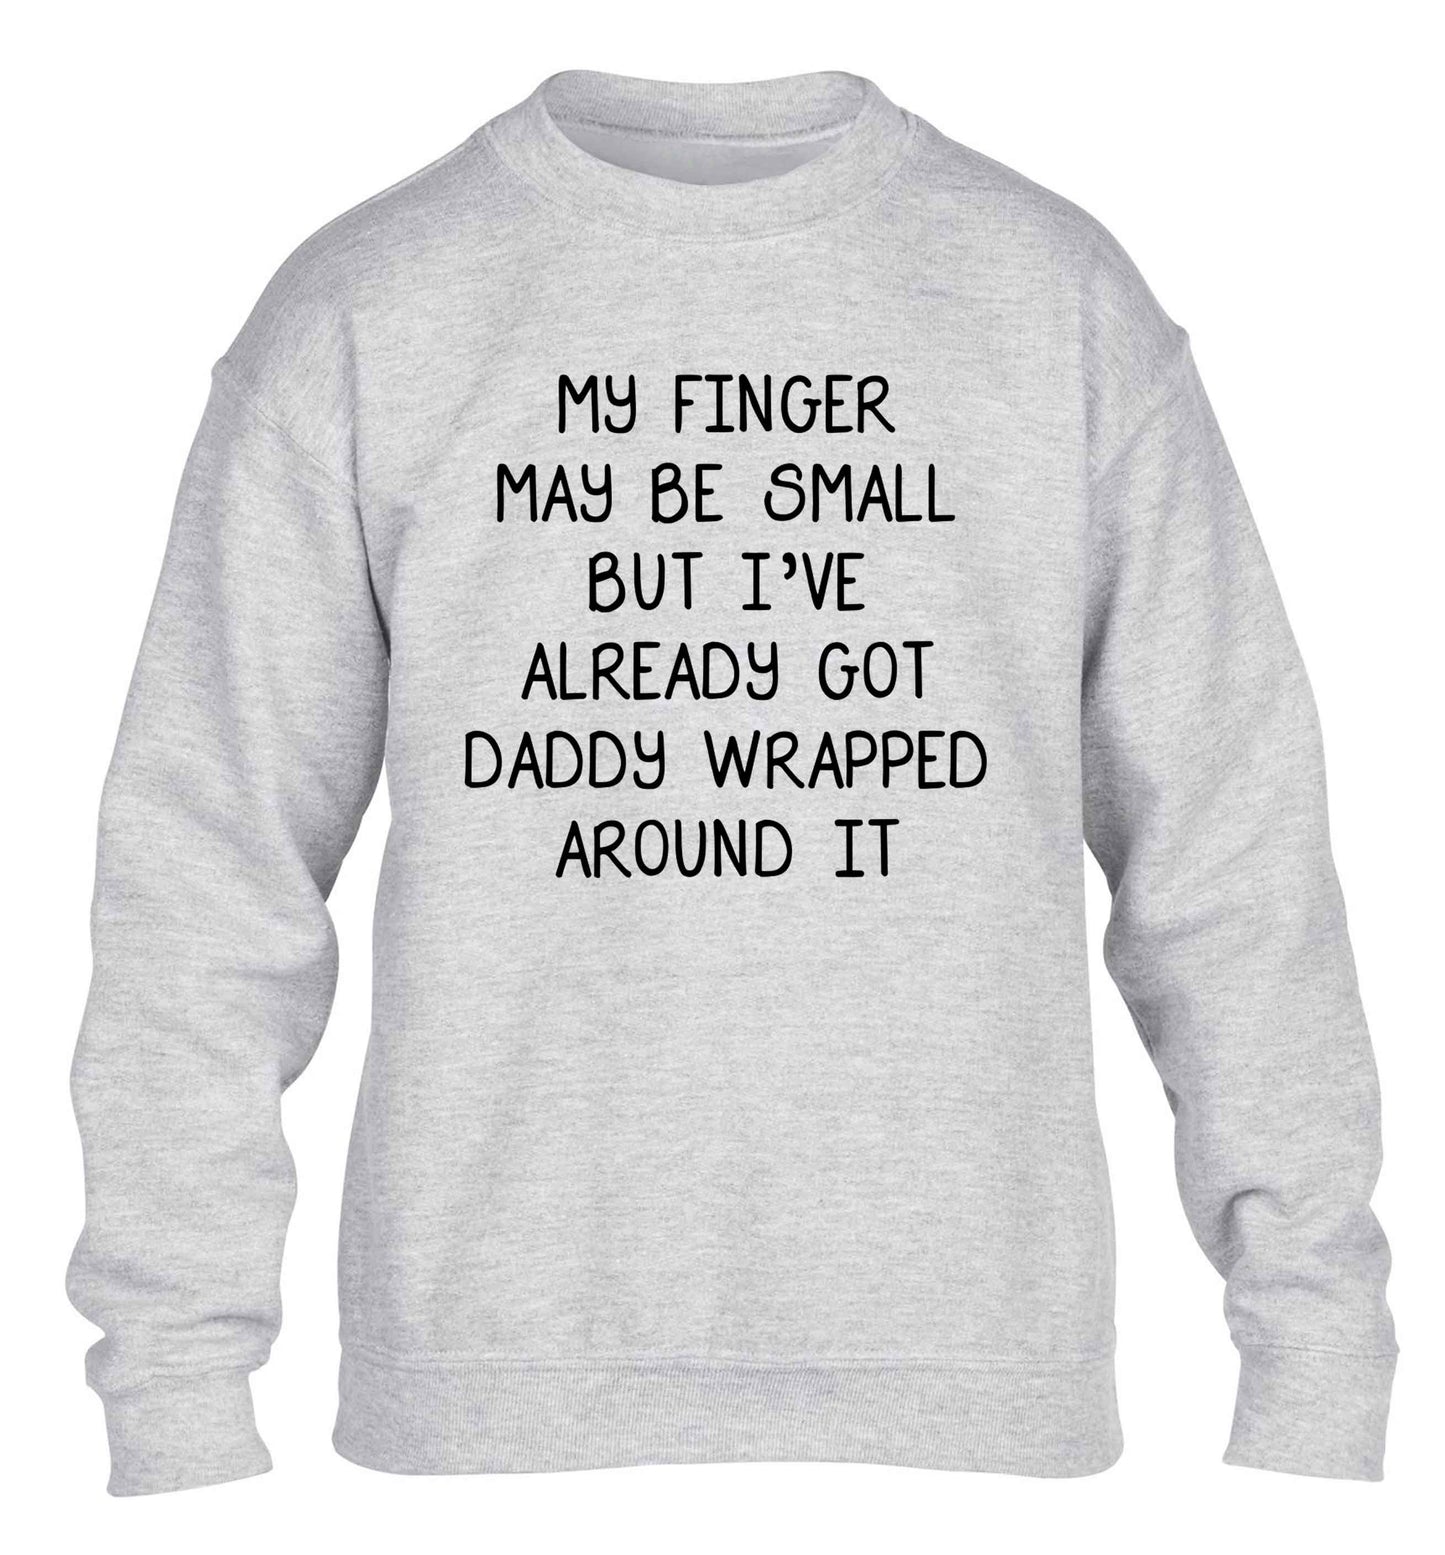 My finger may be small but I've already got daddy wrapped around it children's grey sweater 12-13 Years